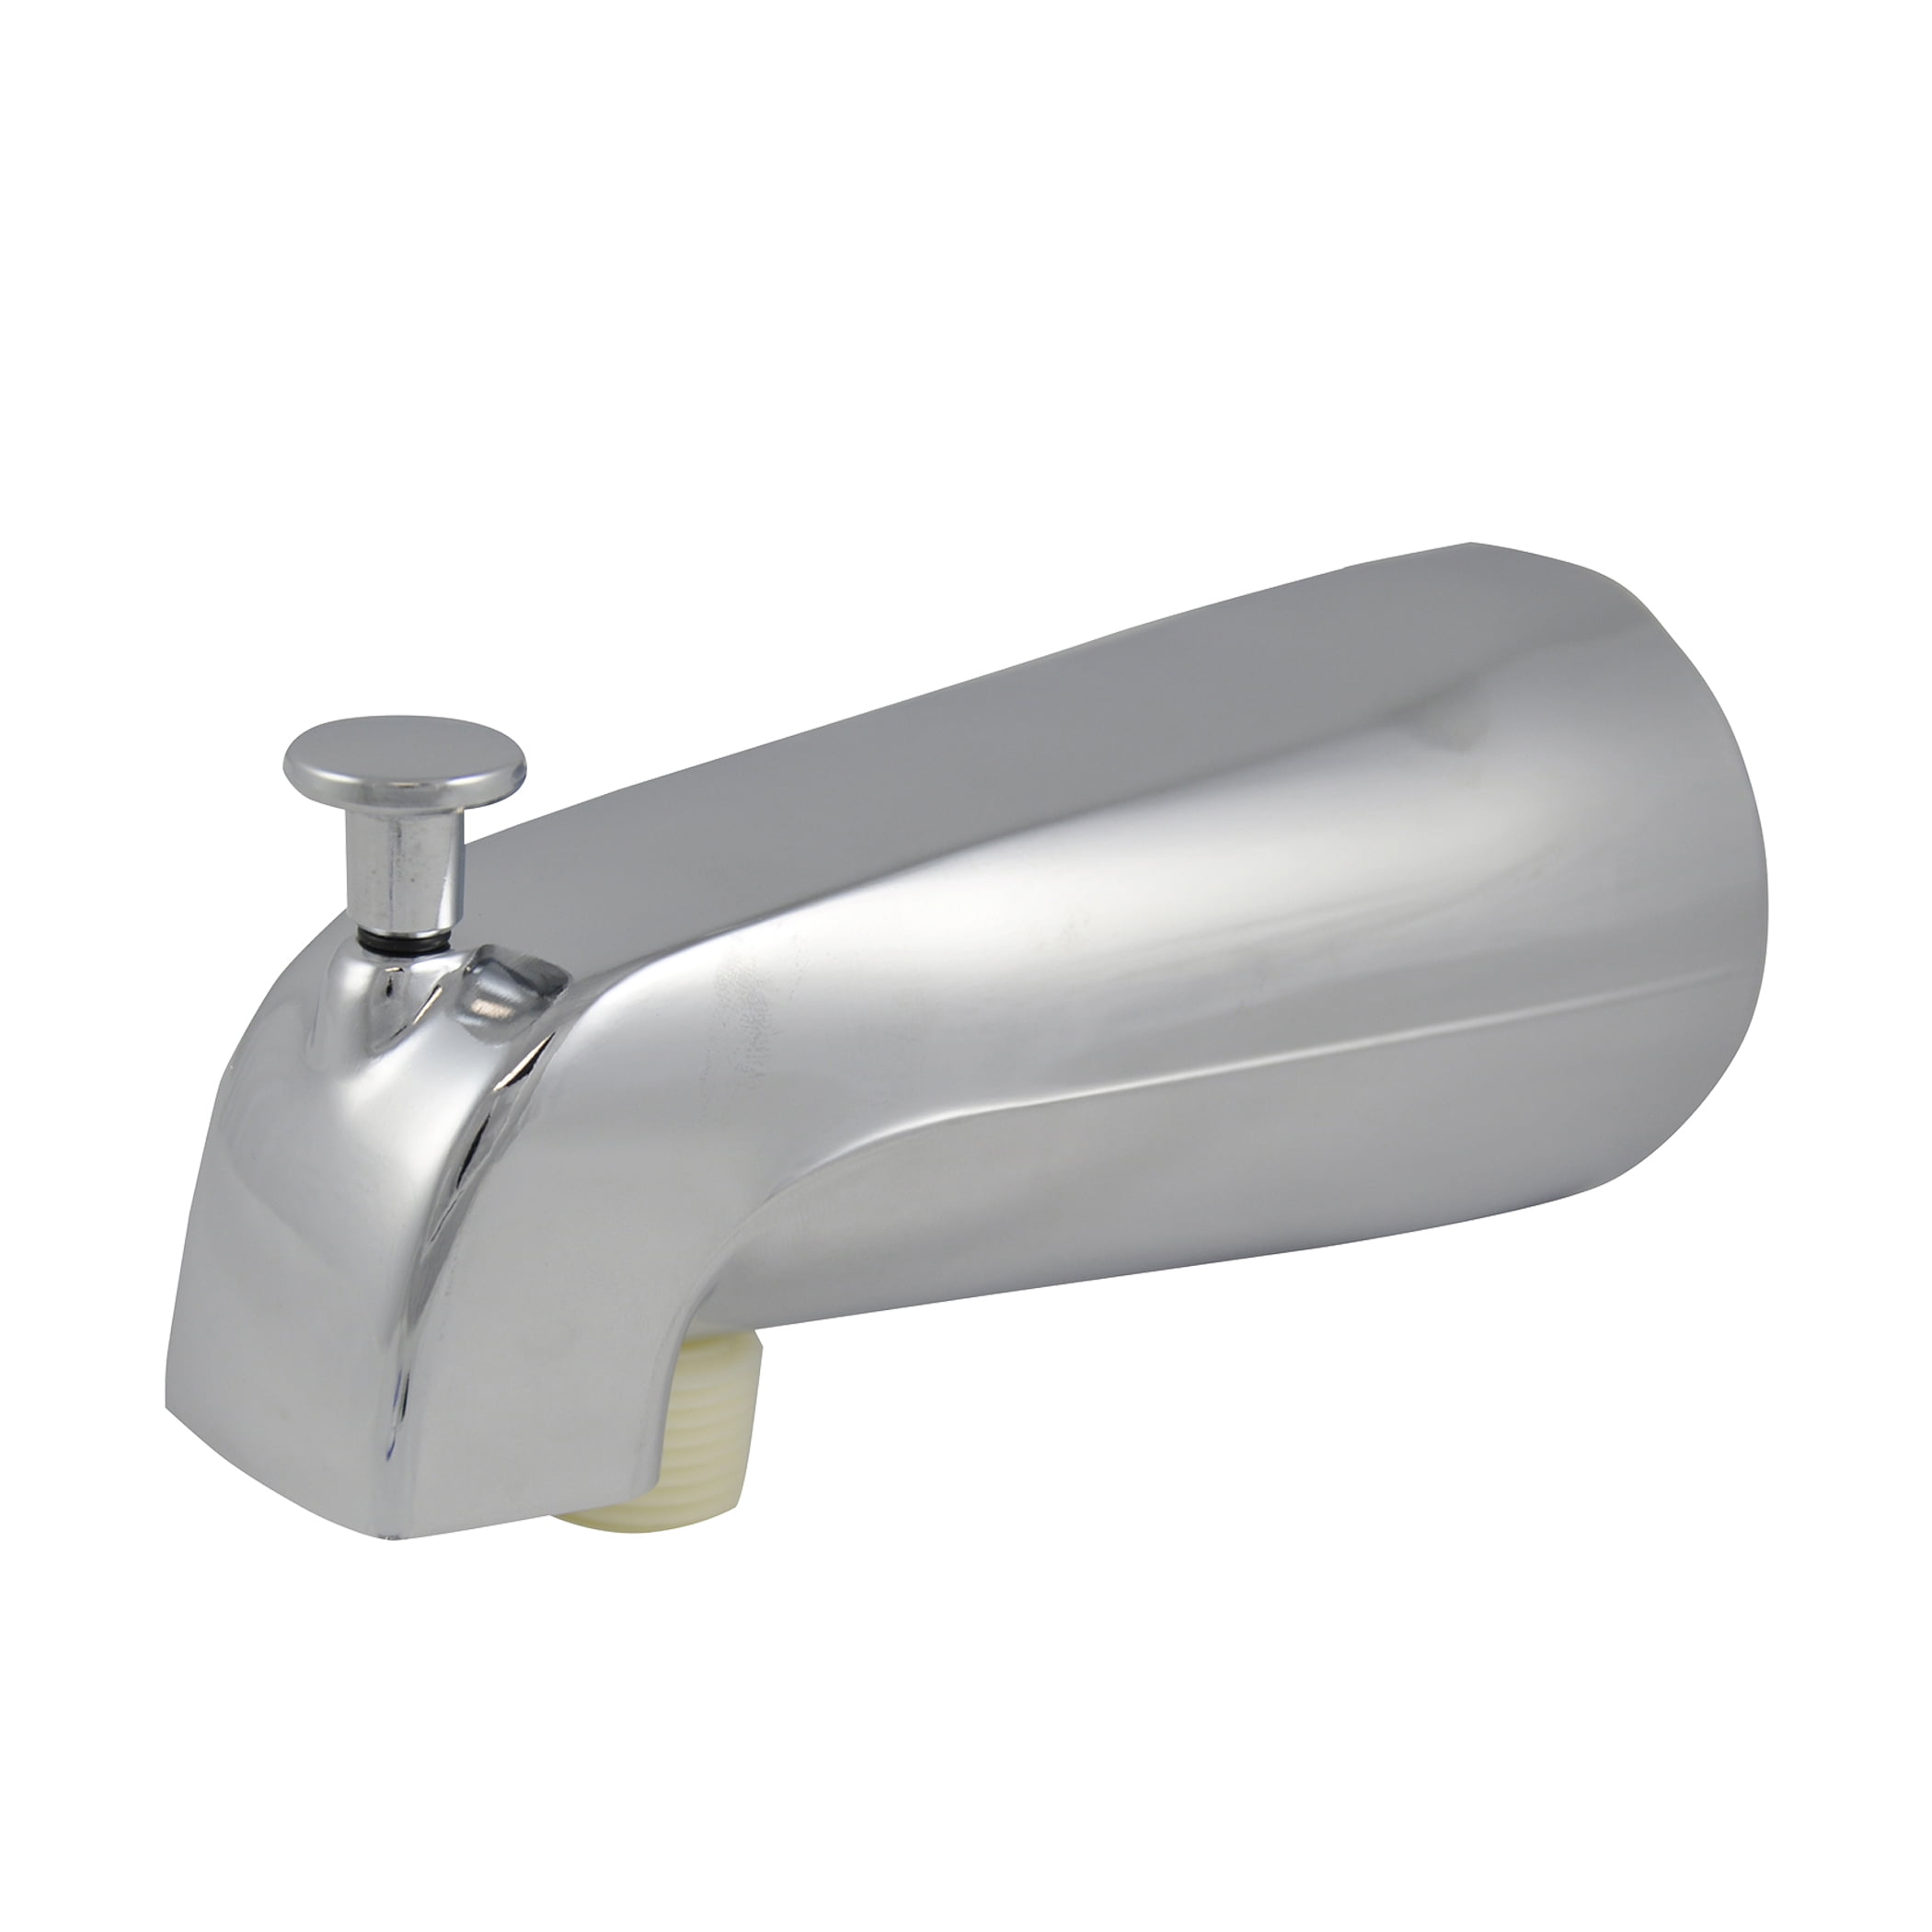 Danco Universal Tub Spout With Handheld, Hand Held Showers For Bathtubs